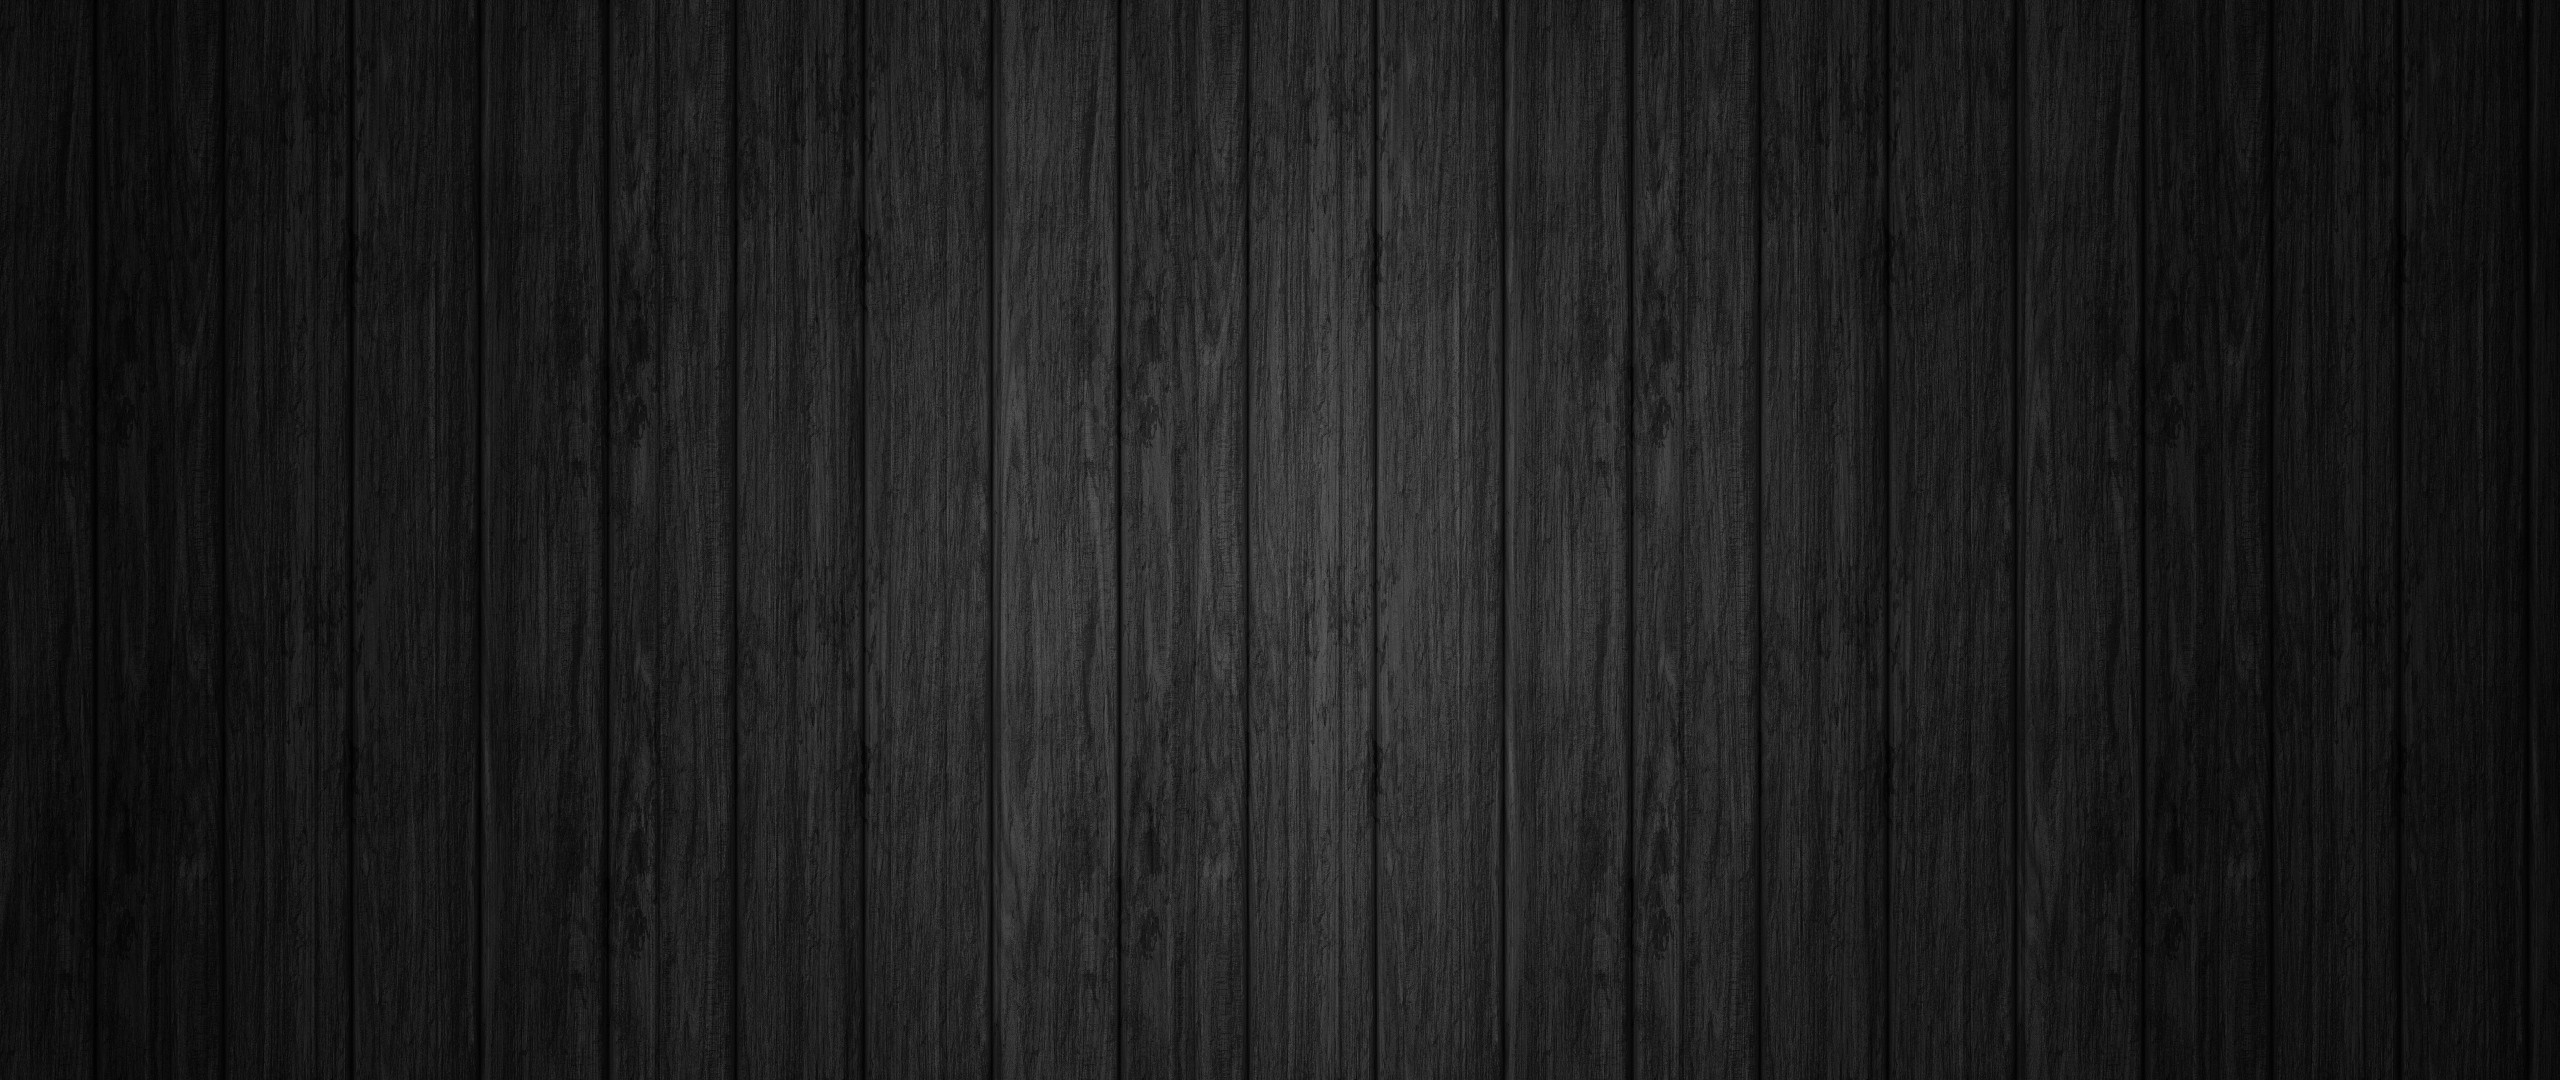 2560x1080 Wood patterns Wallpapers Pictures